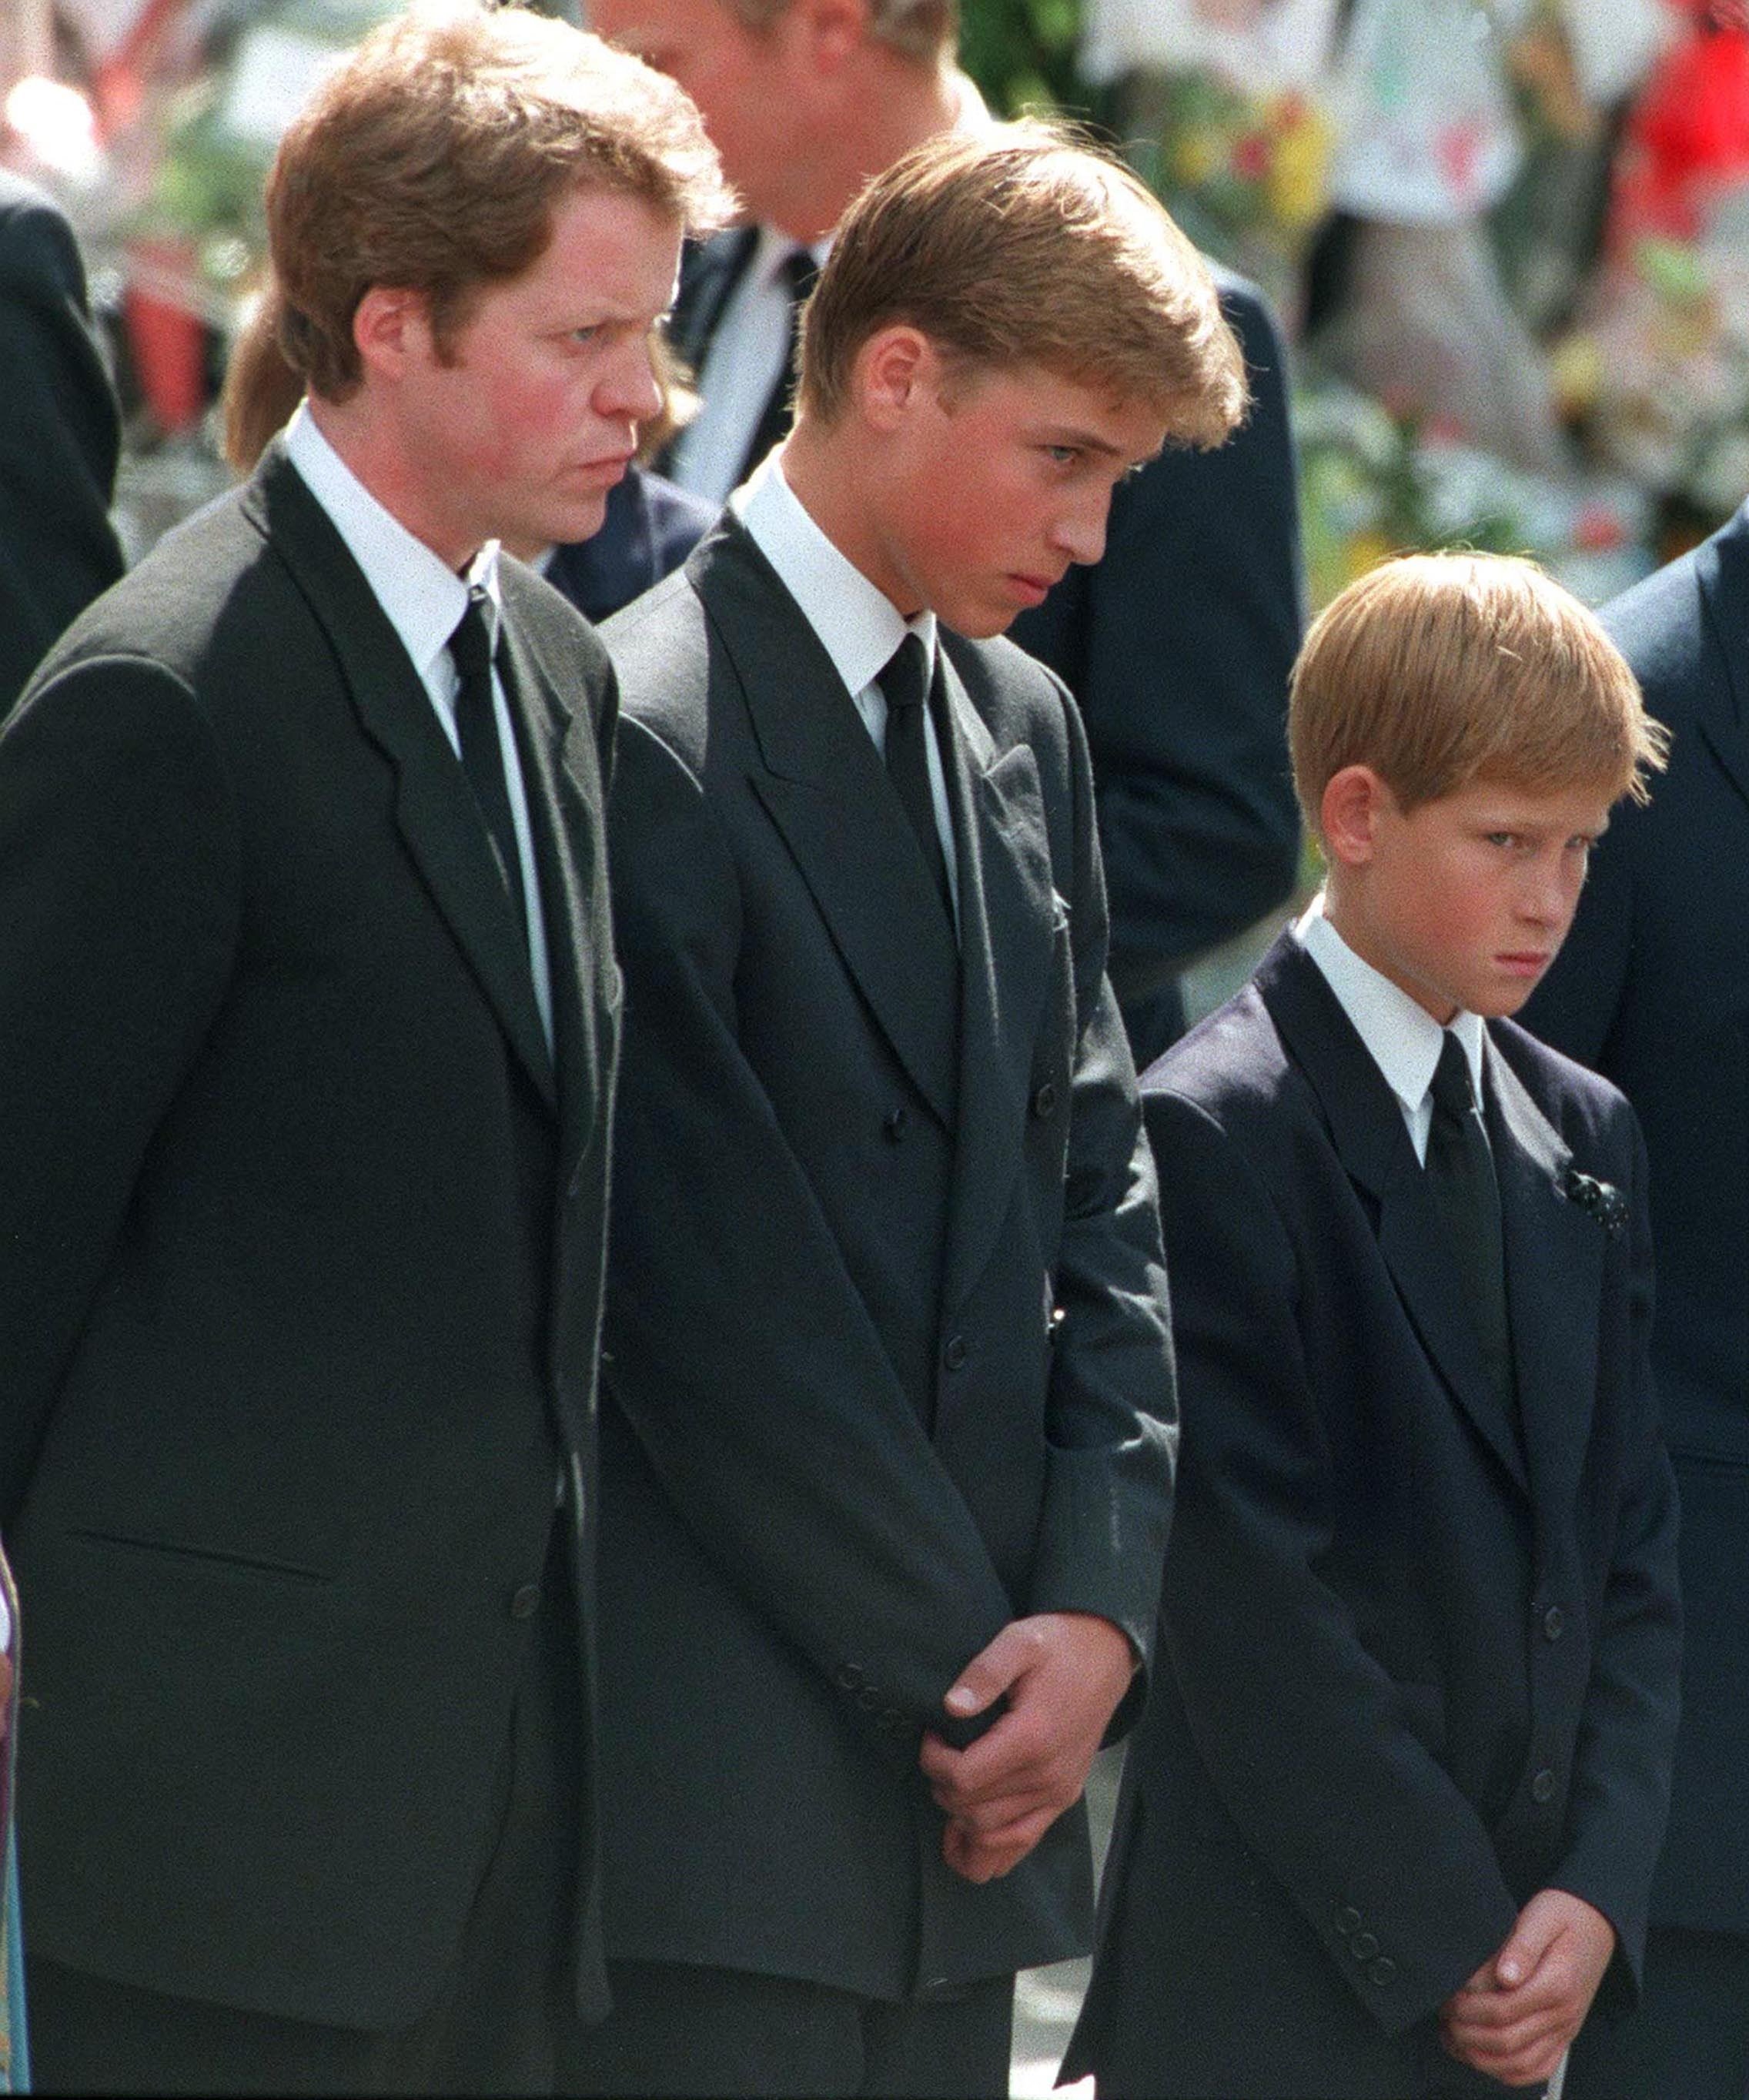 Princes William, Prince Harrys and their uncle Earl Spencer outside Westminster Abbey on the day of Princess Diana's funeral service on September 6, 1997. | Source: Getty Images